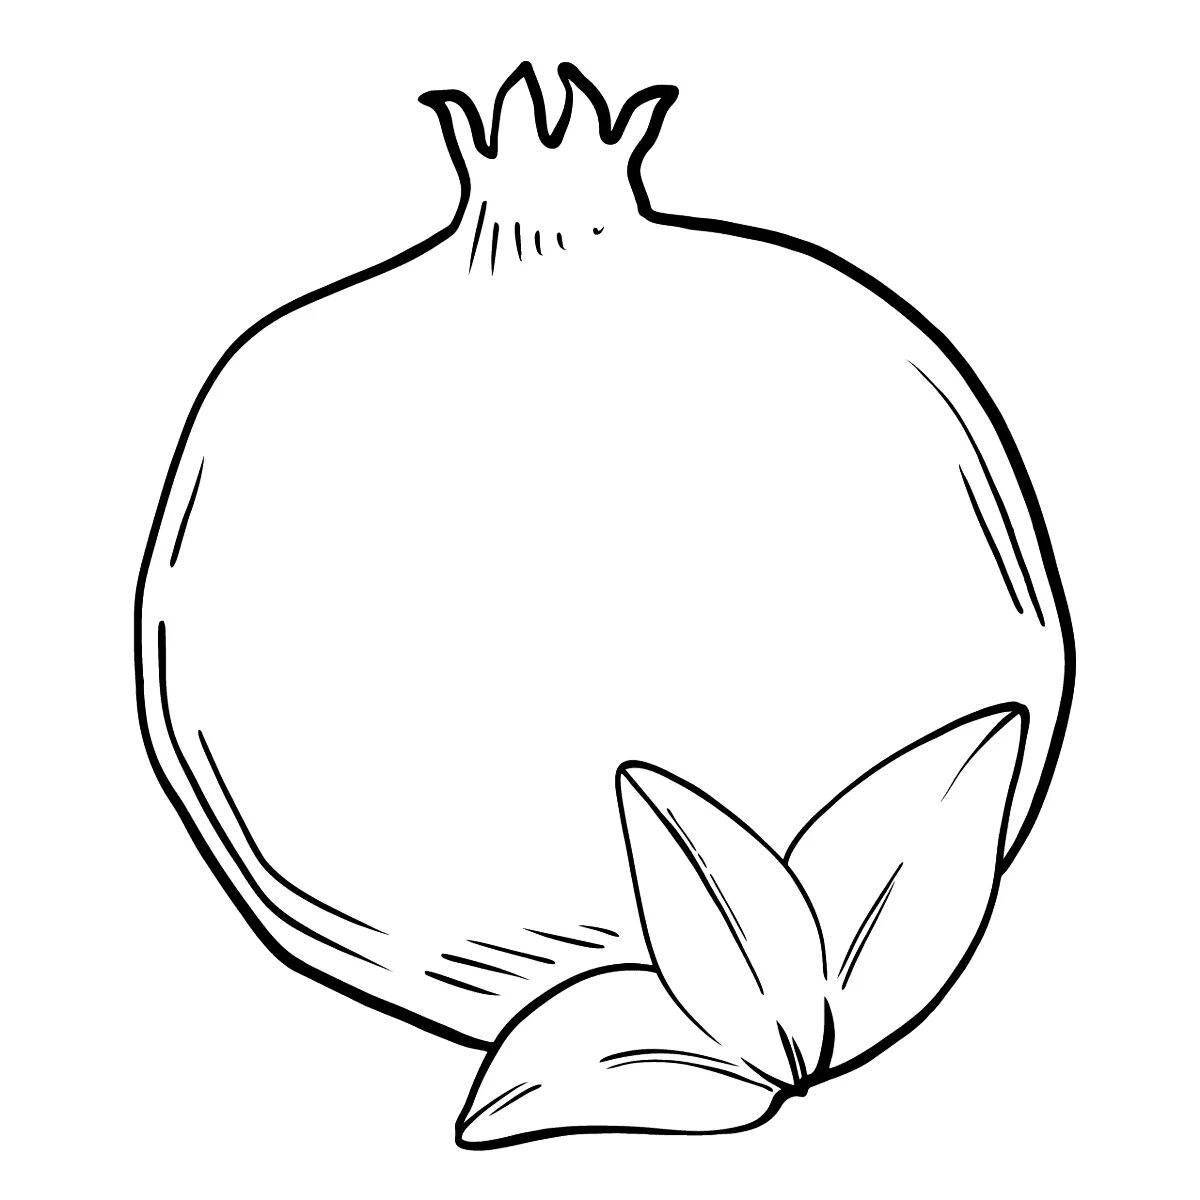 Amazing pomegranate coloring pages for kids